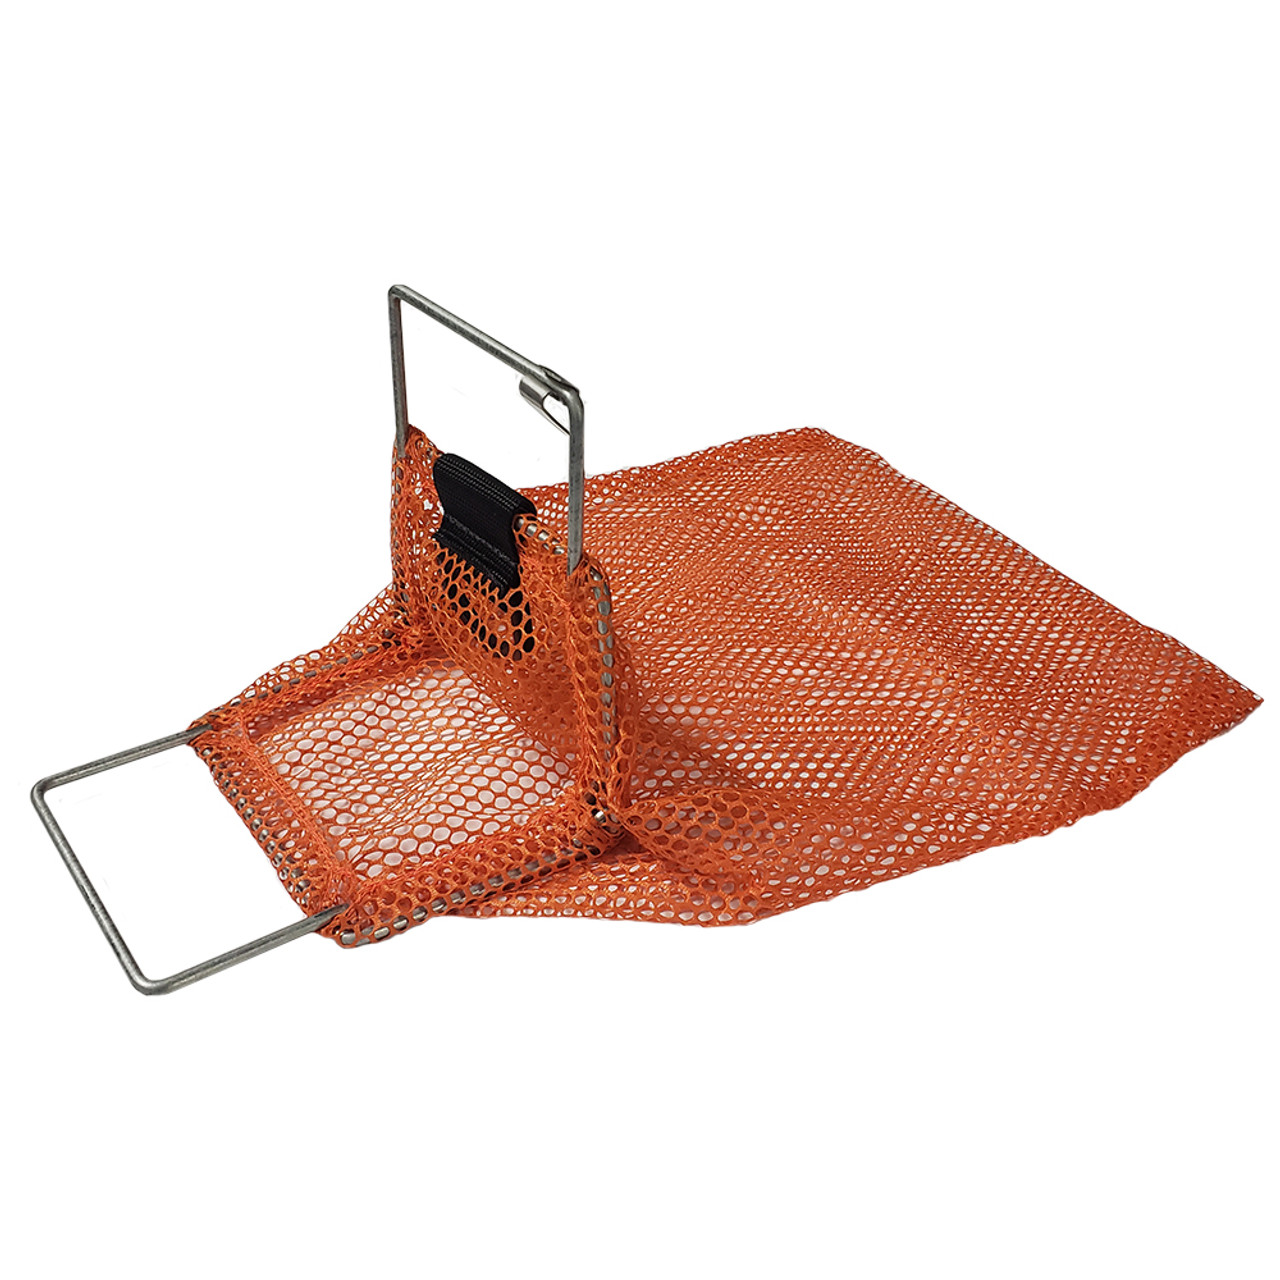 Mini Galvanized Wire Handle Mesh Catch Bag with D-Ring, Approx. 10x15 (5x7 Opening), Orange